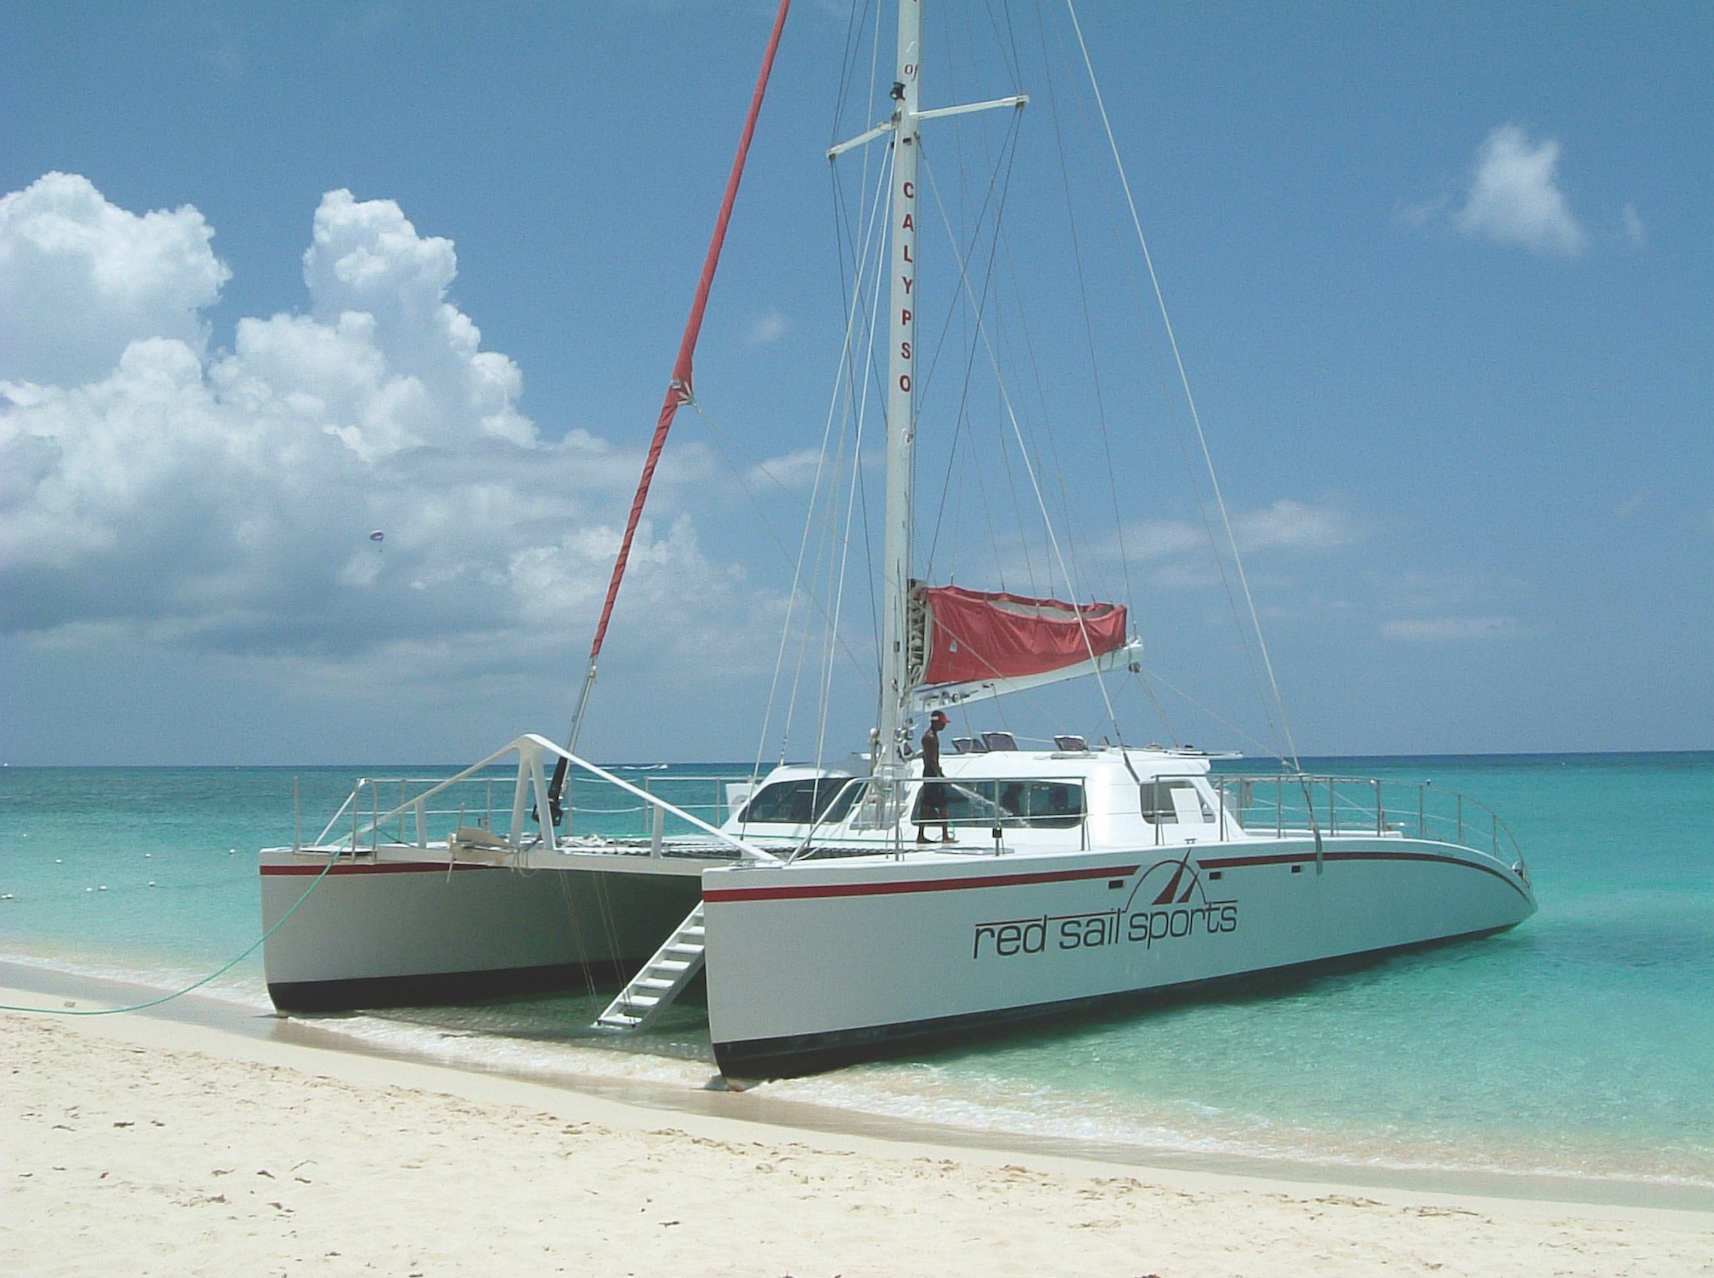 Sailing in the Cayman Islands